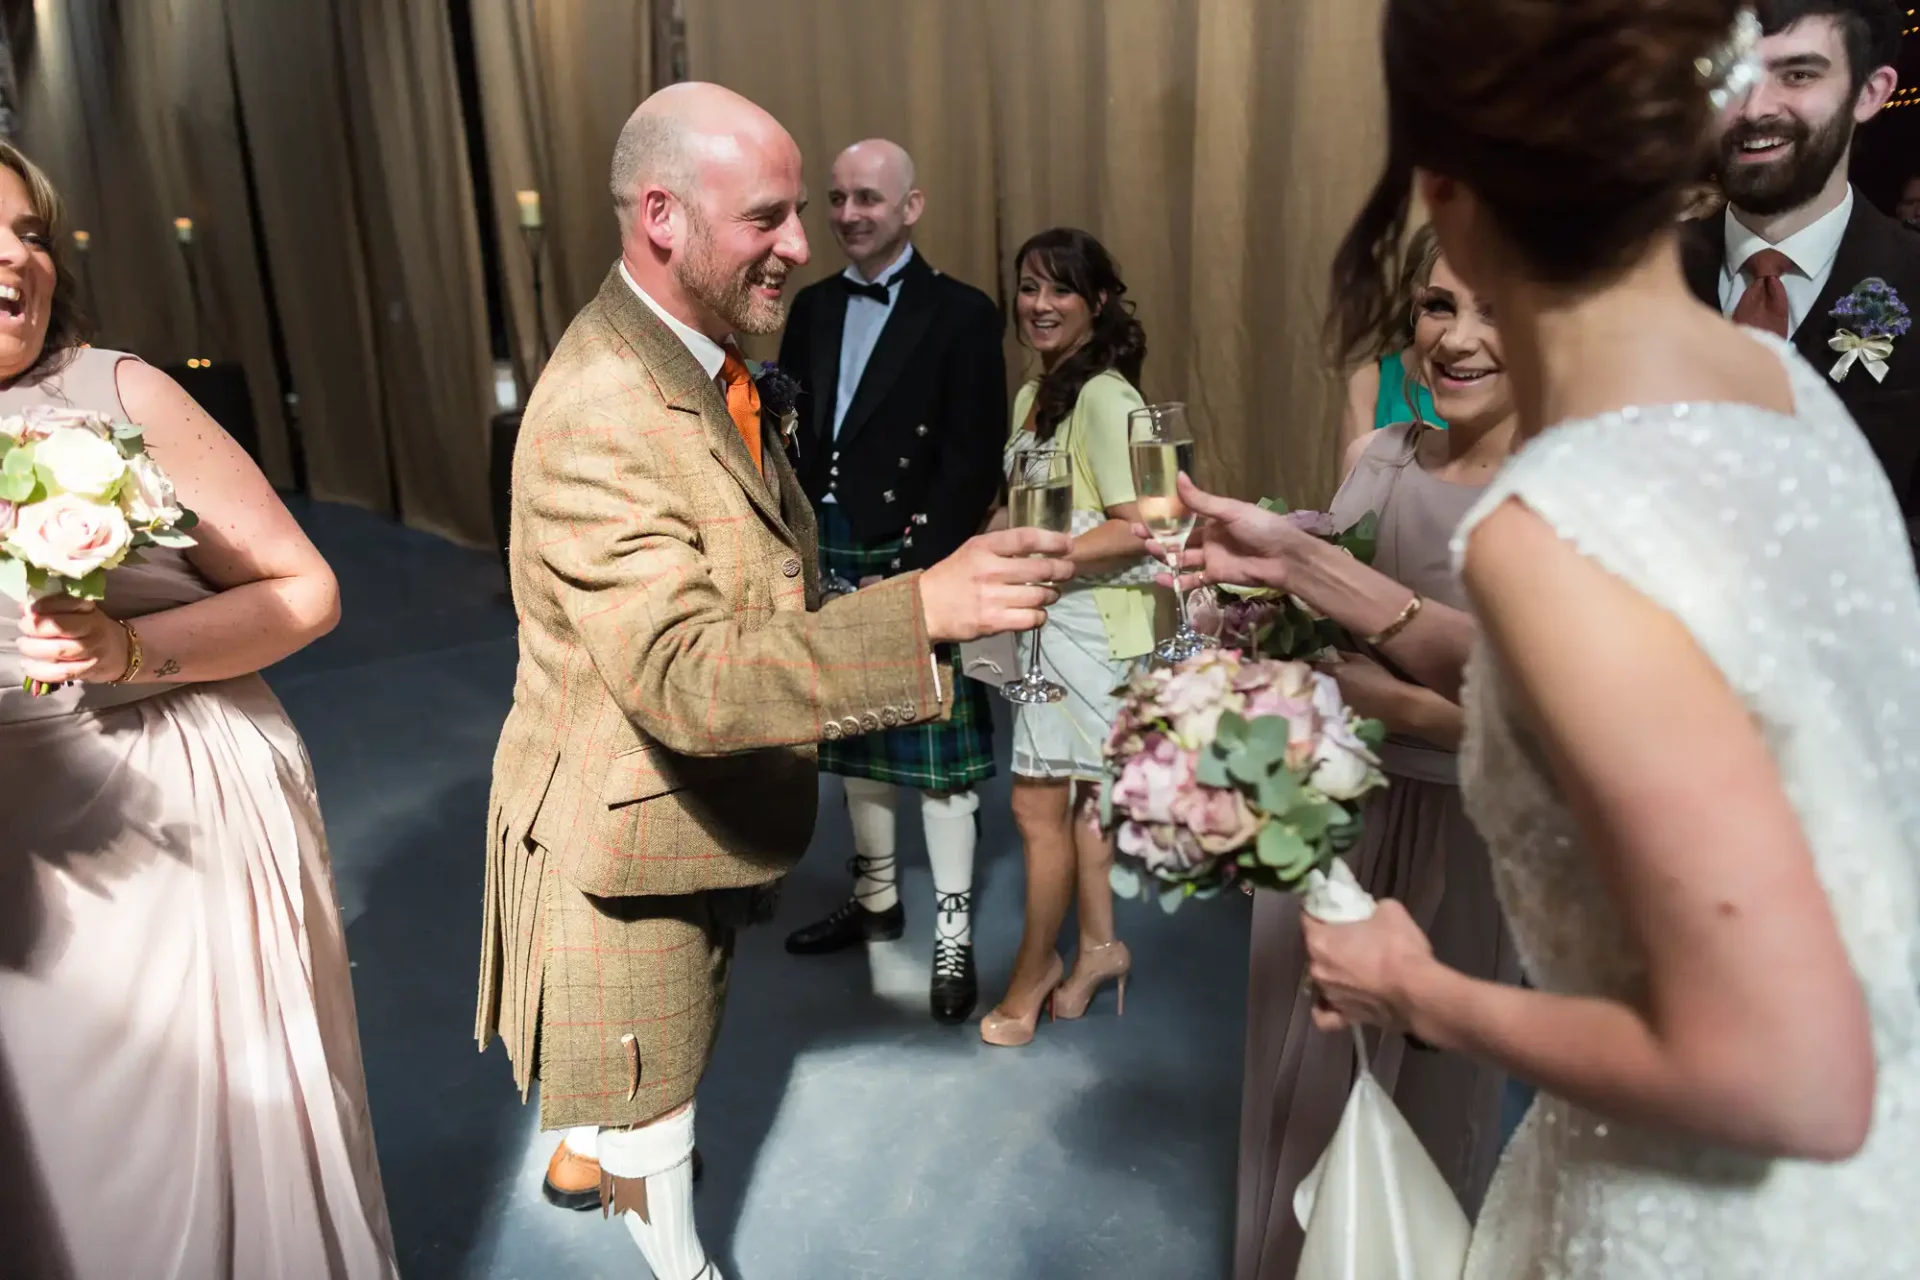 A joyful wedding reception scene with a bald man in a kilt toasting with a champagne glass, surrounded by smiling guests in formal attire.